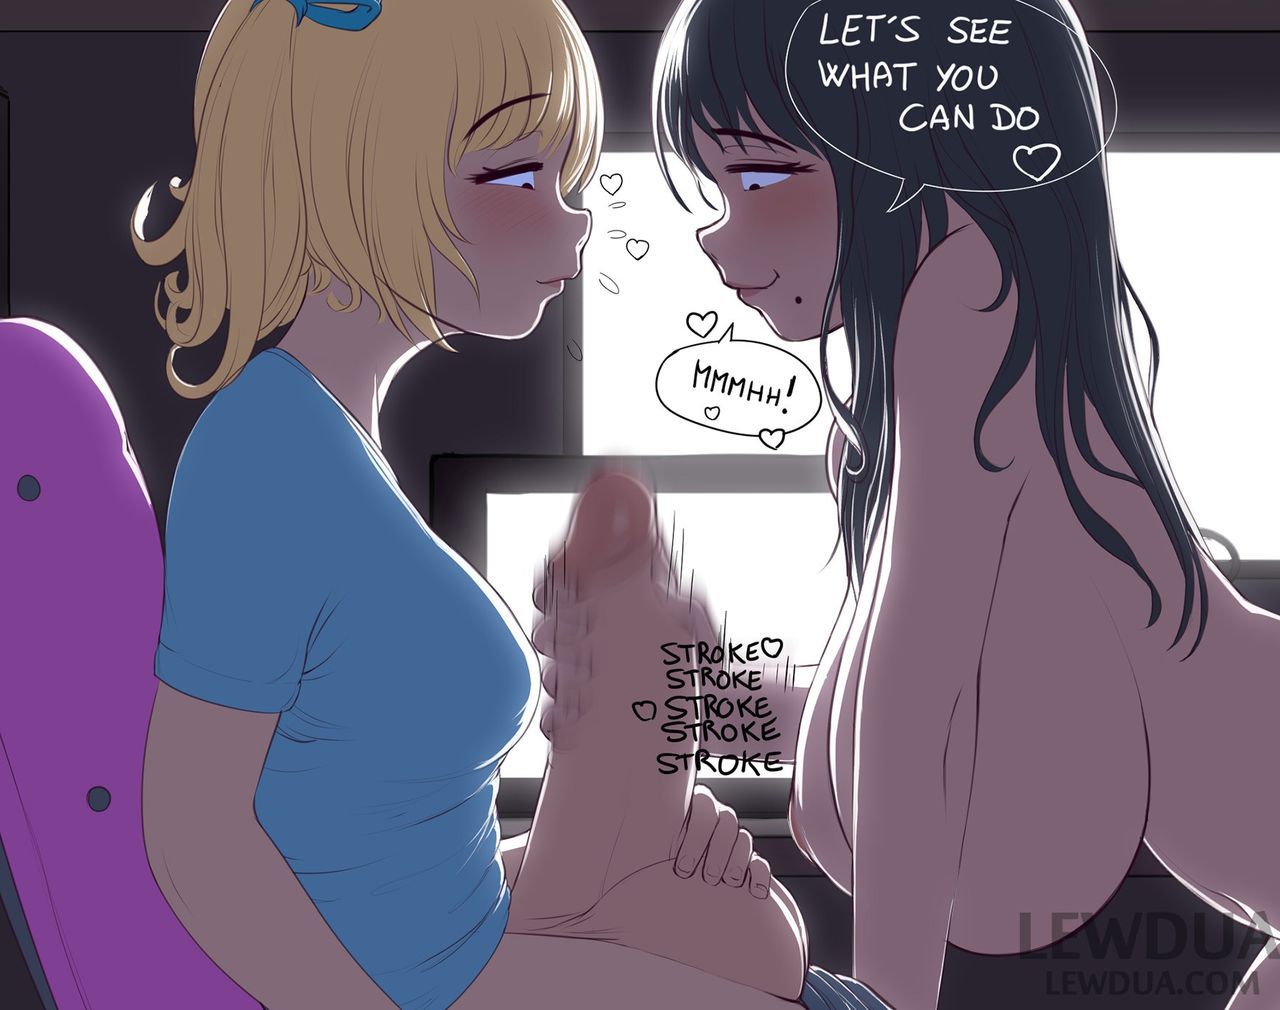 [Lewdua] Love is Sharing - Nessie and Alison 4